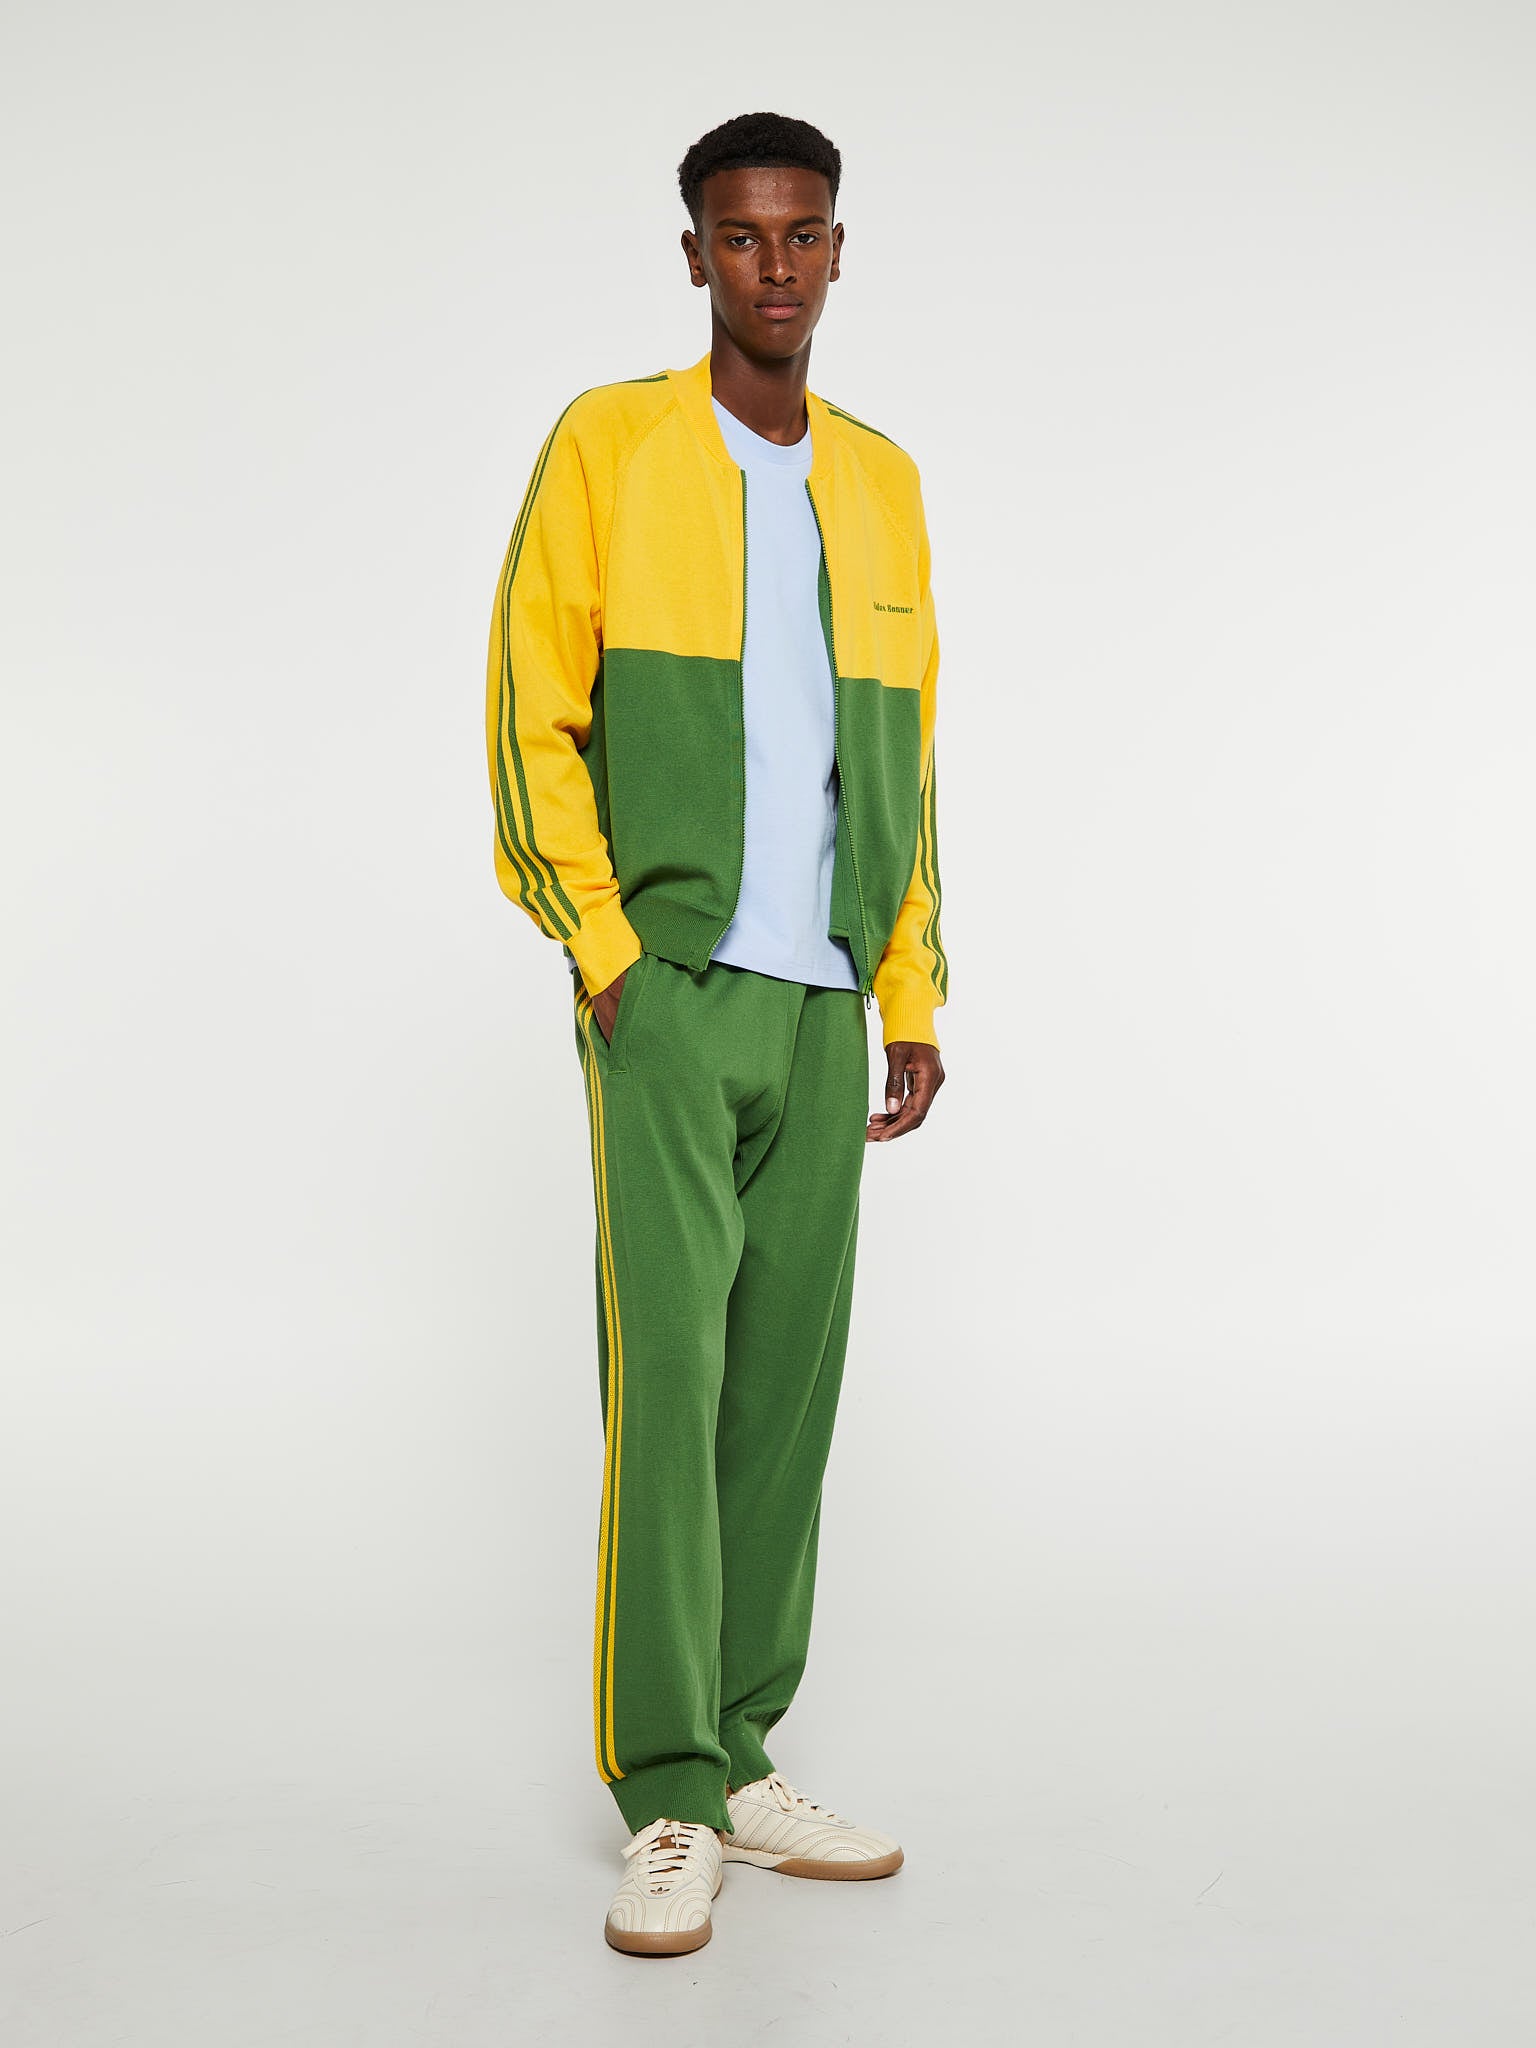 Wales Bonner New Knit Track Top in Green and Yellow